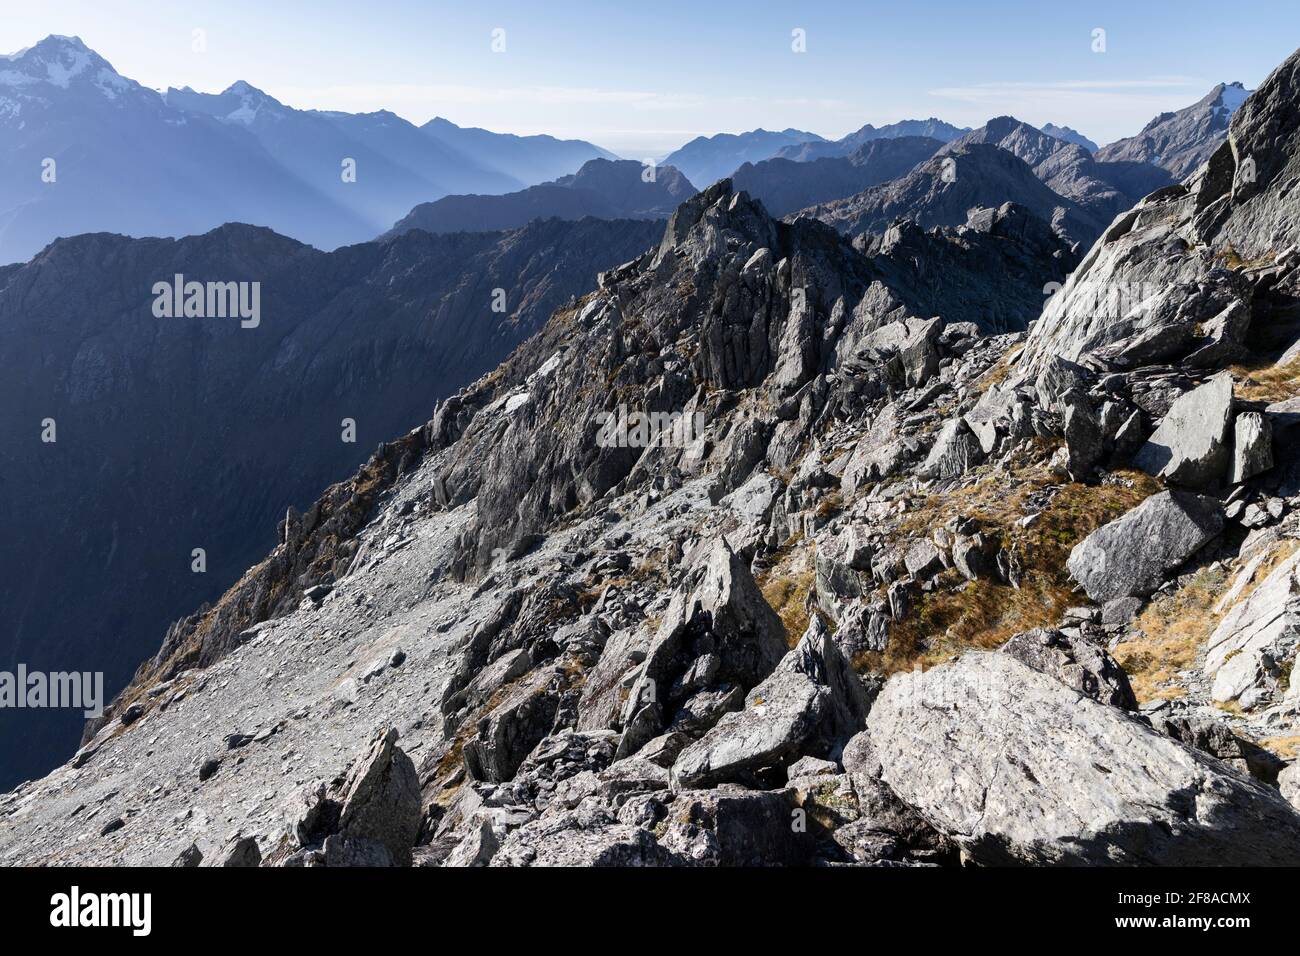 A rocky, rugged ridgeline in Southern Alps, New Zealand Stock Photo